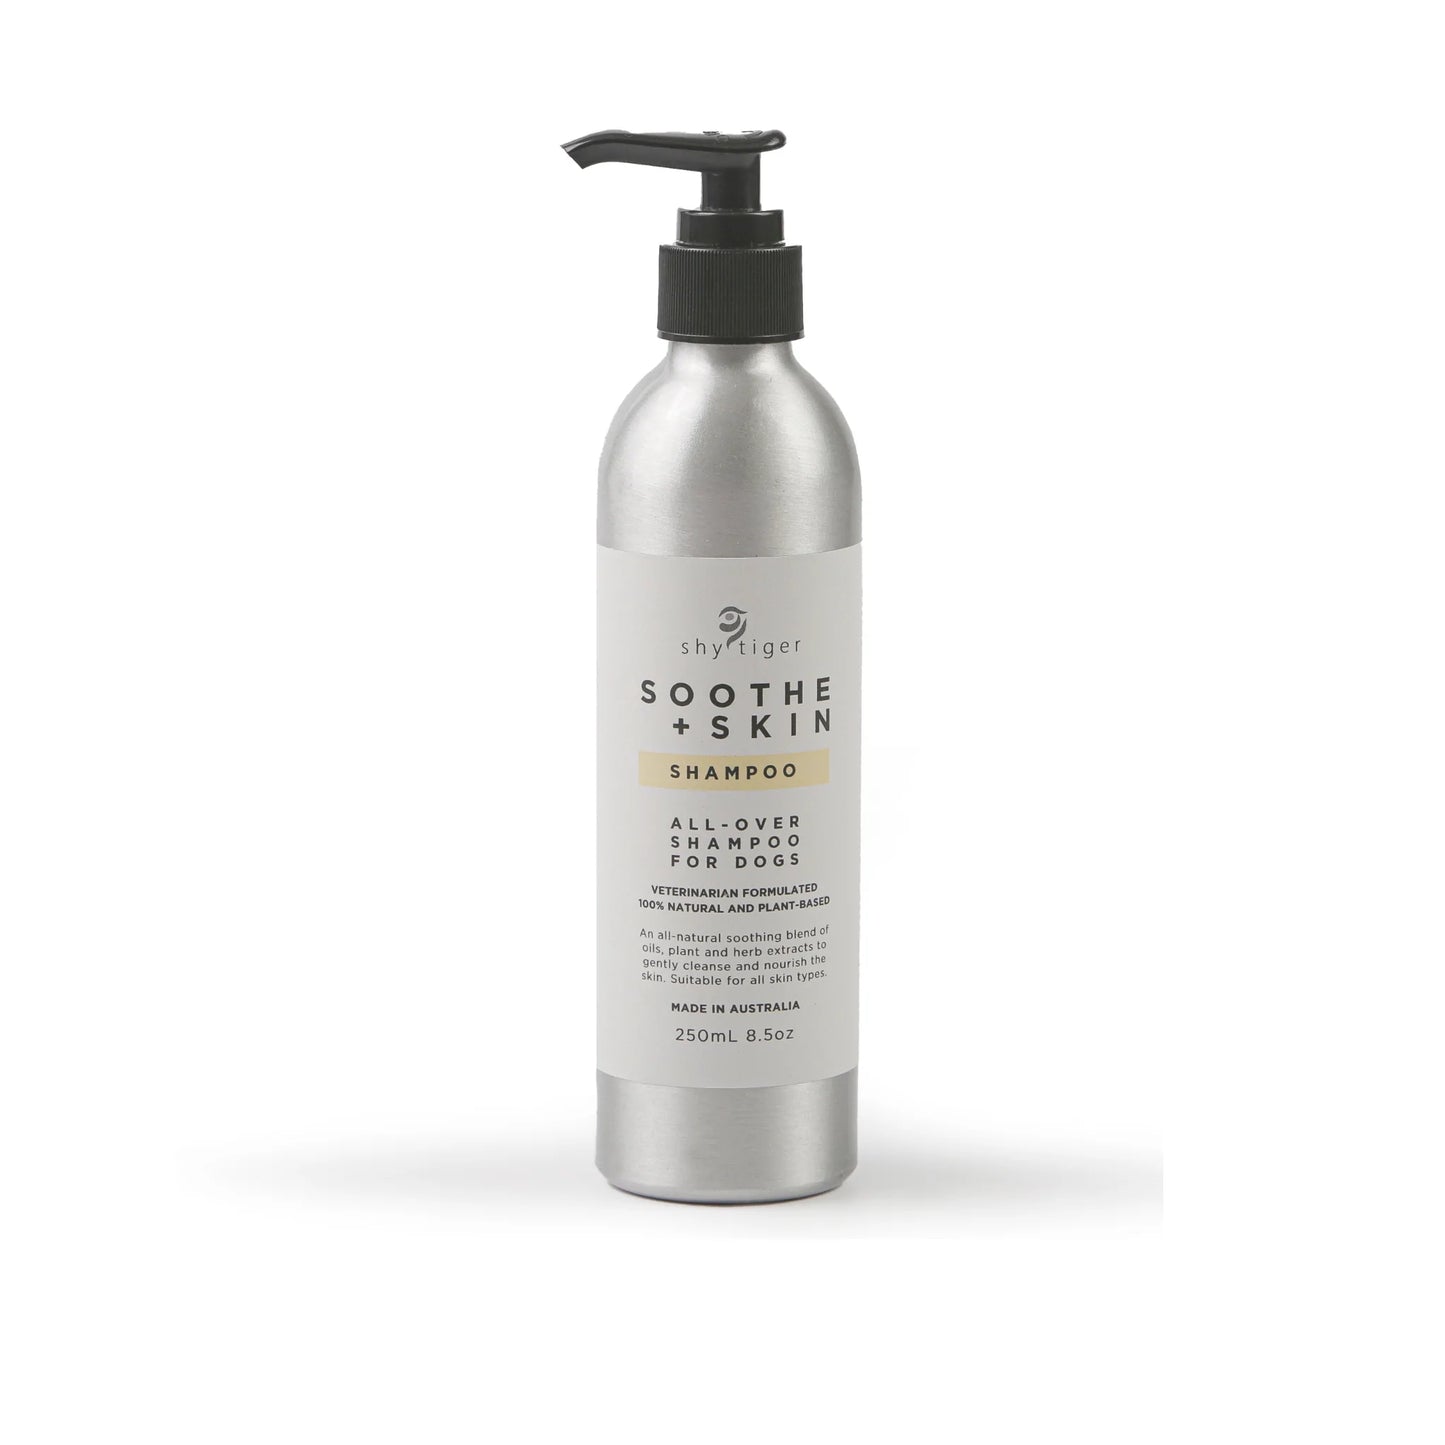 Shy Tiger: Soothe + Skin Shampoo 250mL (concentrate)